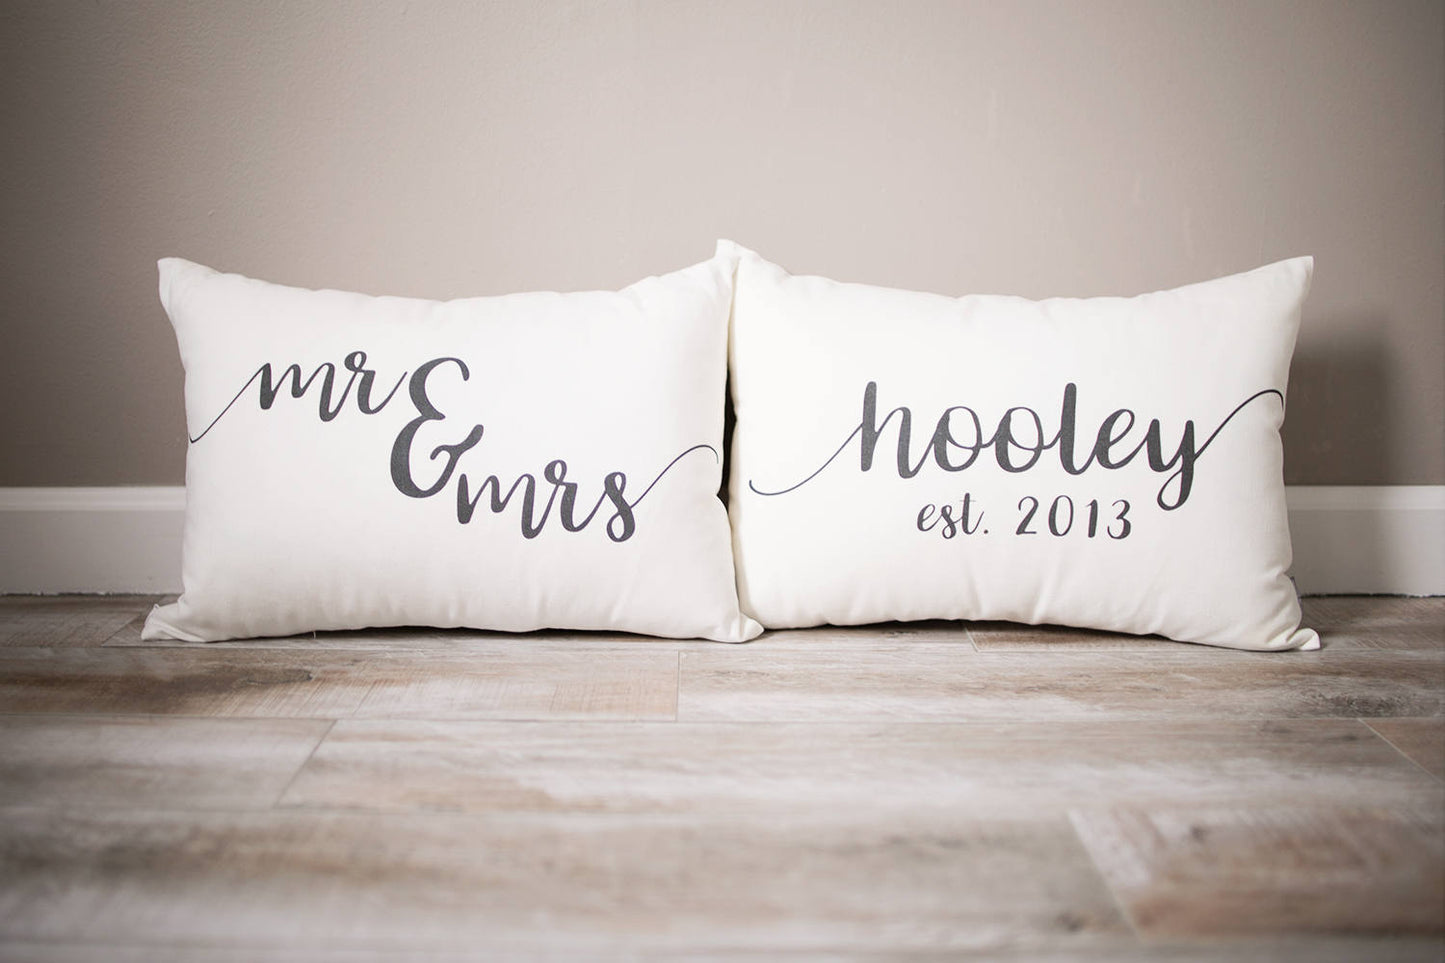 Mr and Mrs Pillow Set | Wedding Pillow Set | Custom Monogrammed Pillow | Pillows with Mr and Mrs Last Name & Established Date | Couples Gift